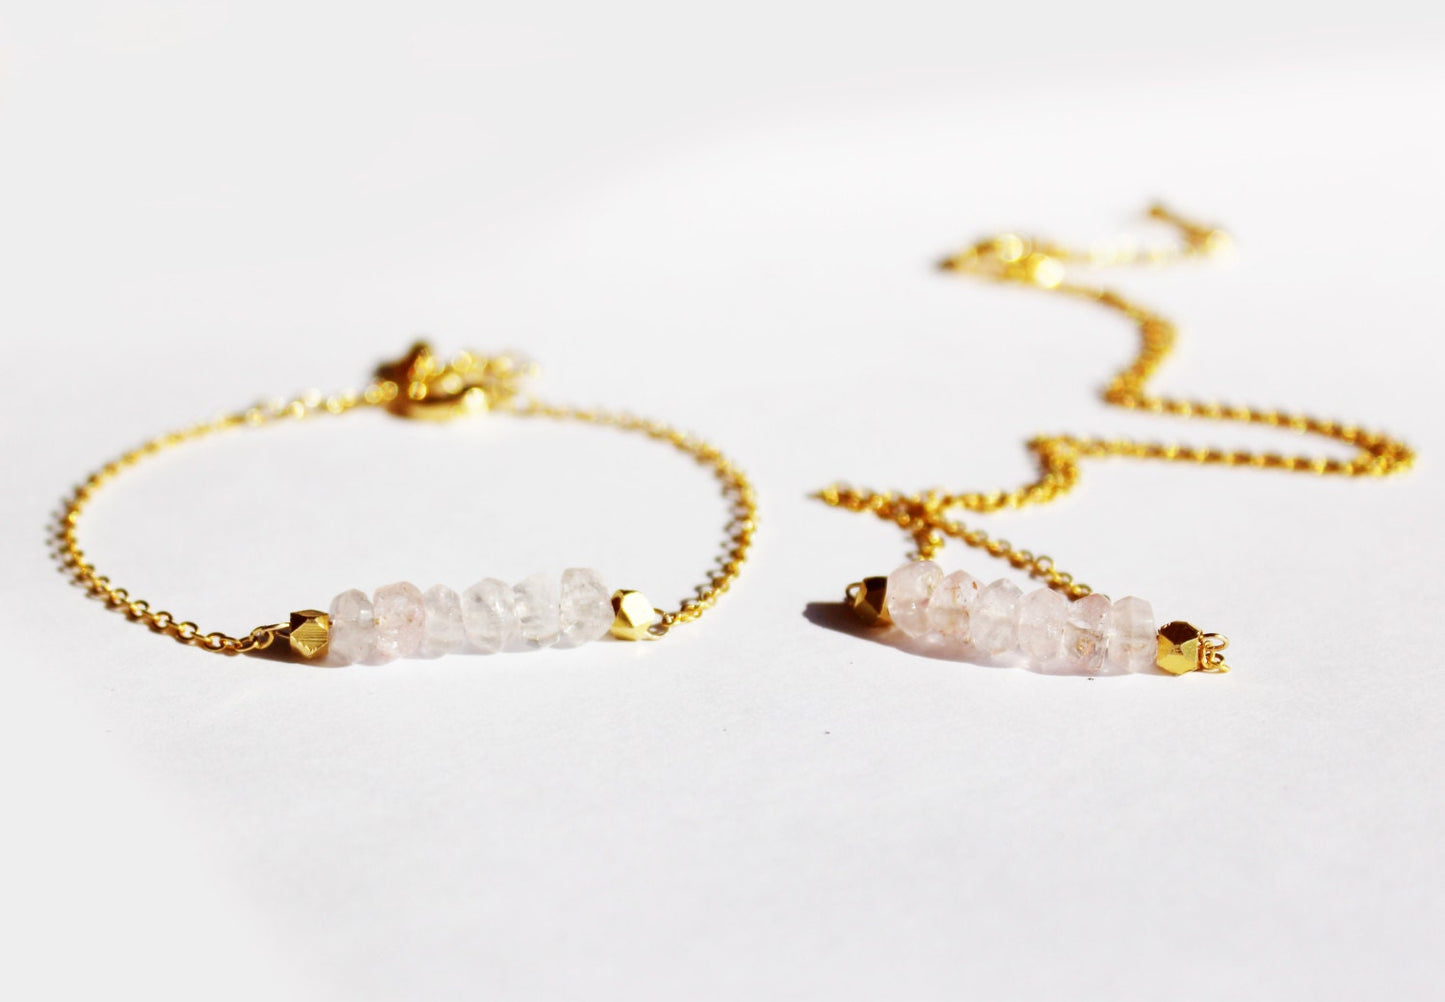 Gold Rose Quartz Bracelet and Necklace Gift Set - Minimalist Jewelry - Pink and Gold Bracelet and Necklace